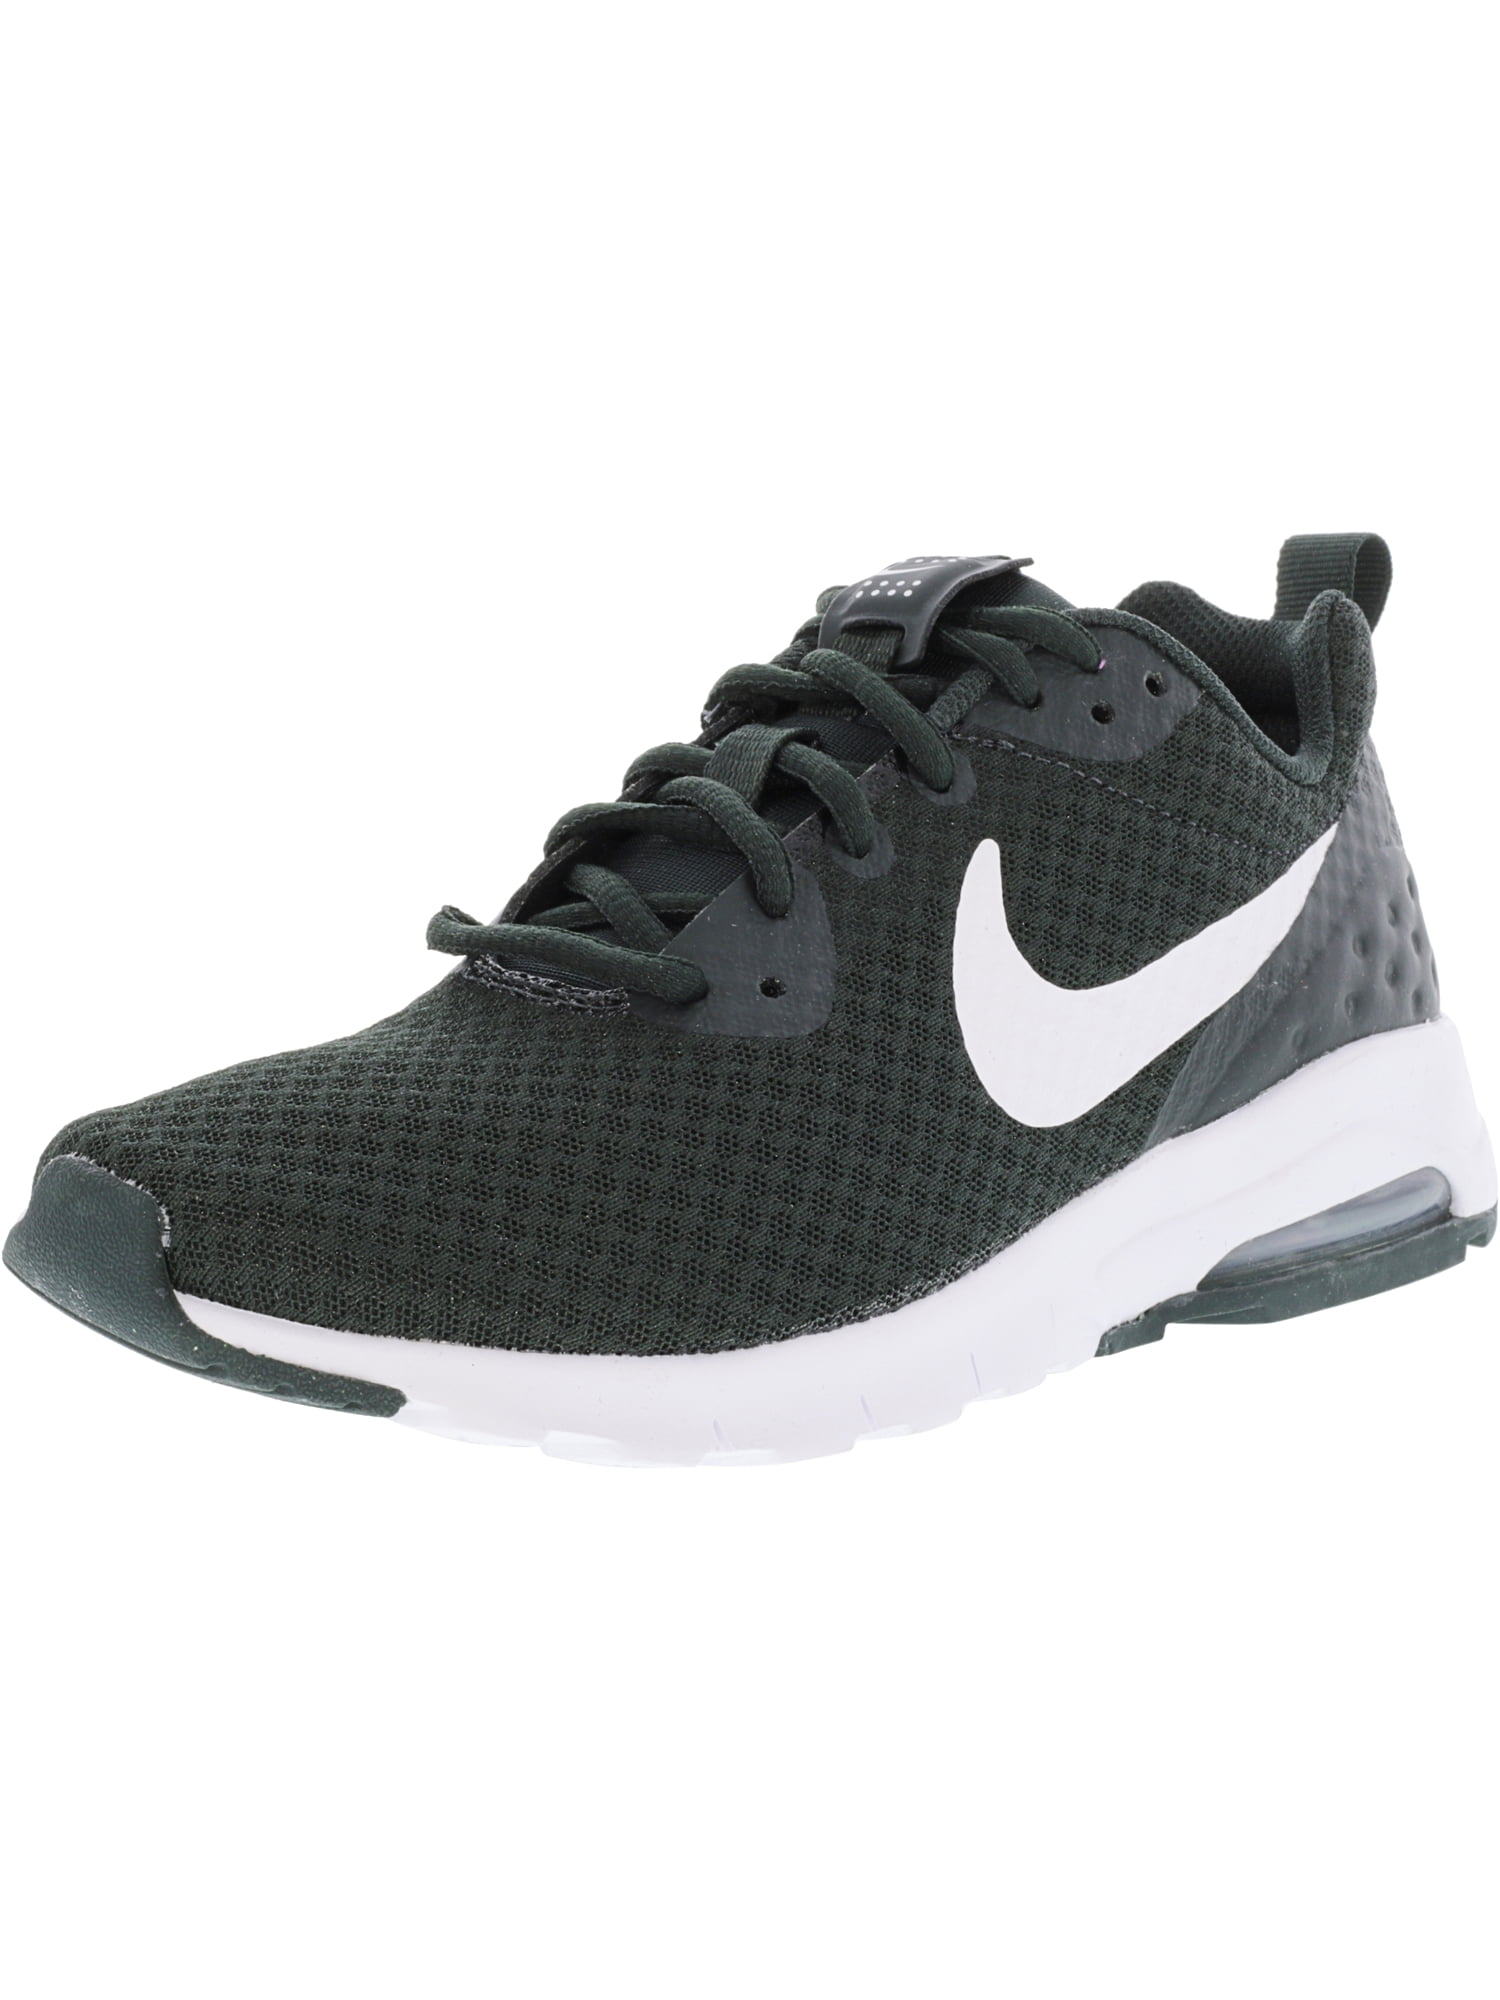 nike air max motion lw mens running shoes